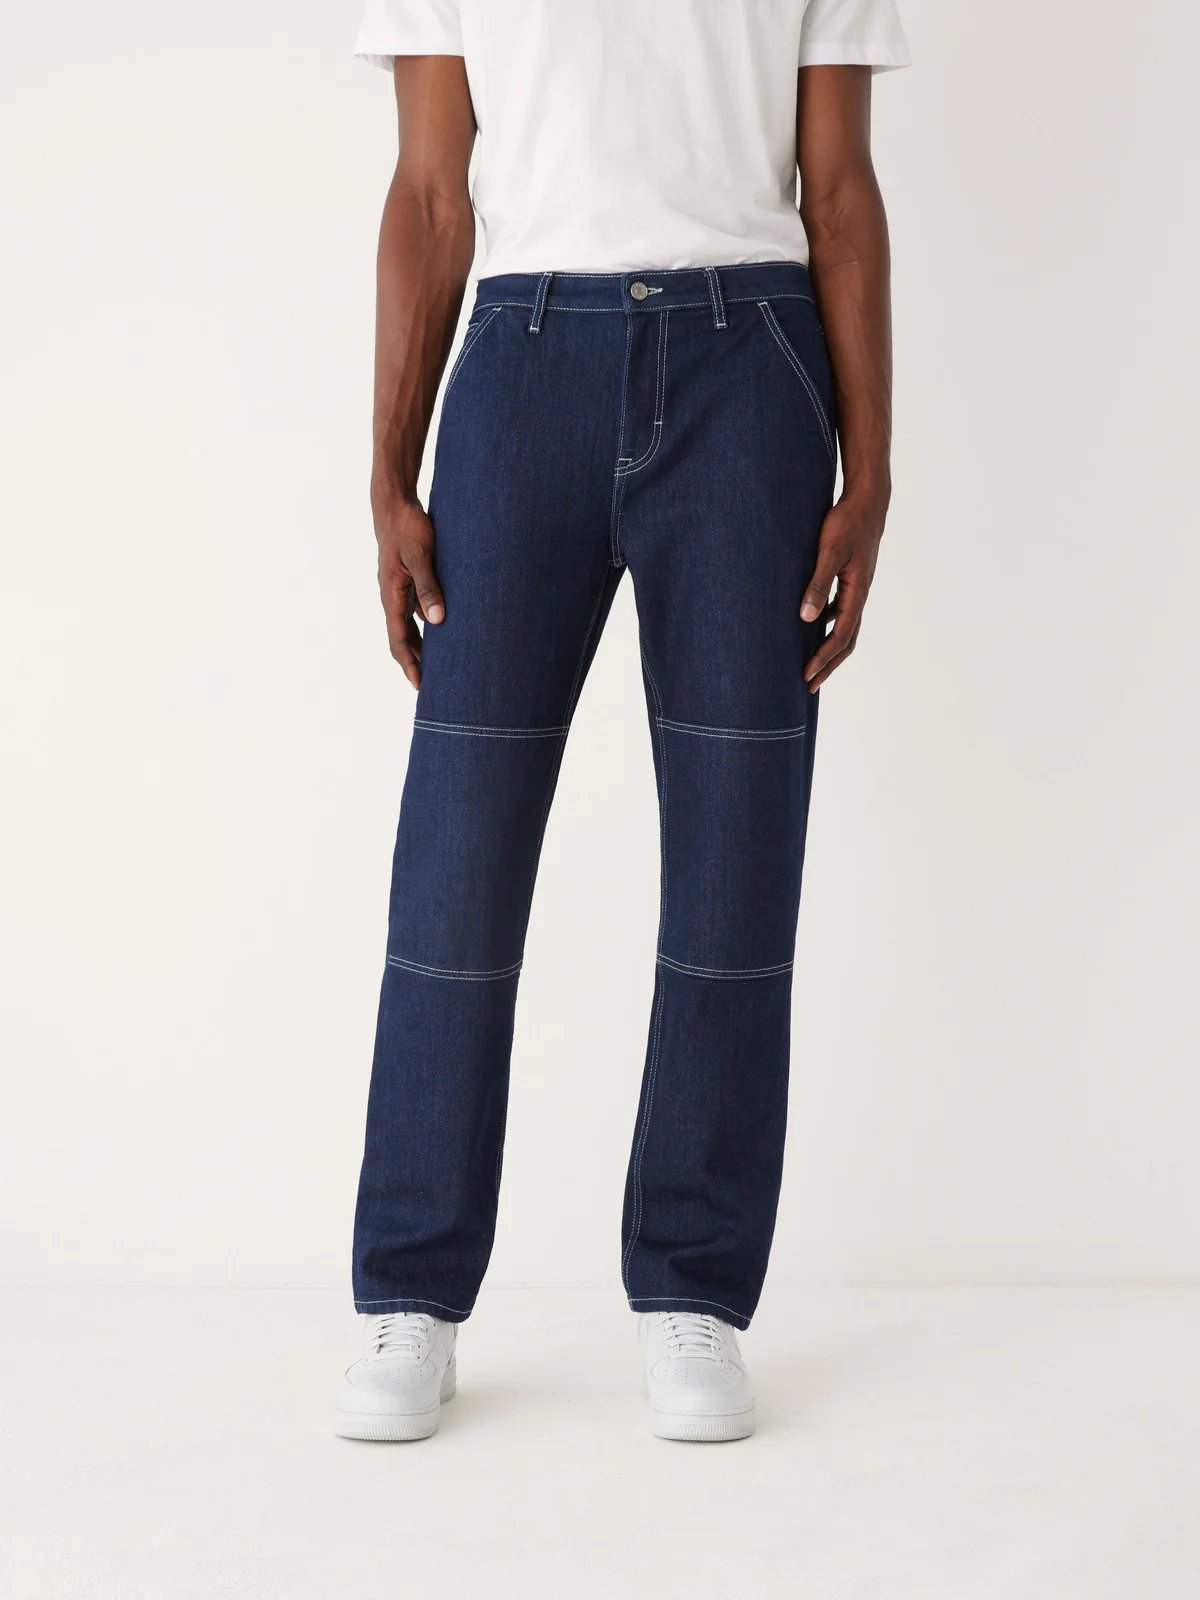 The Nolan Straight Fit Cargo Jean in Navy